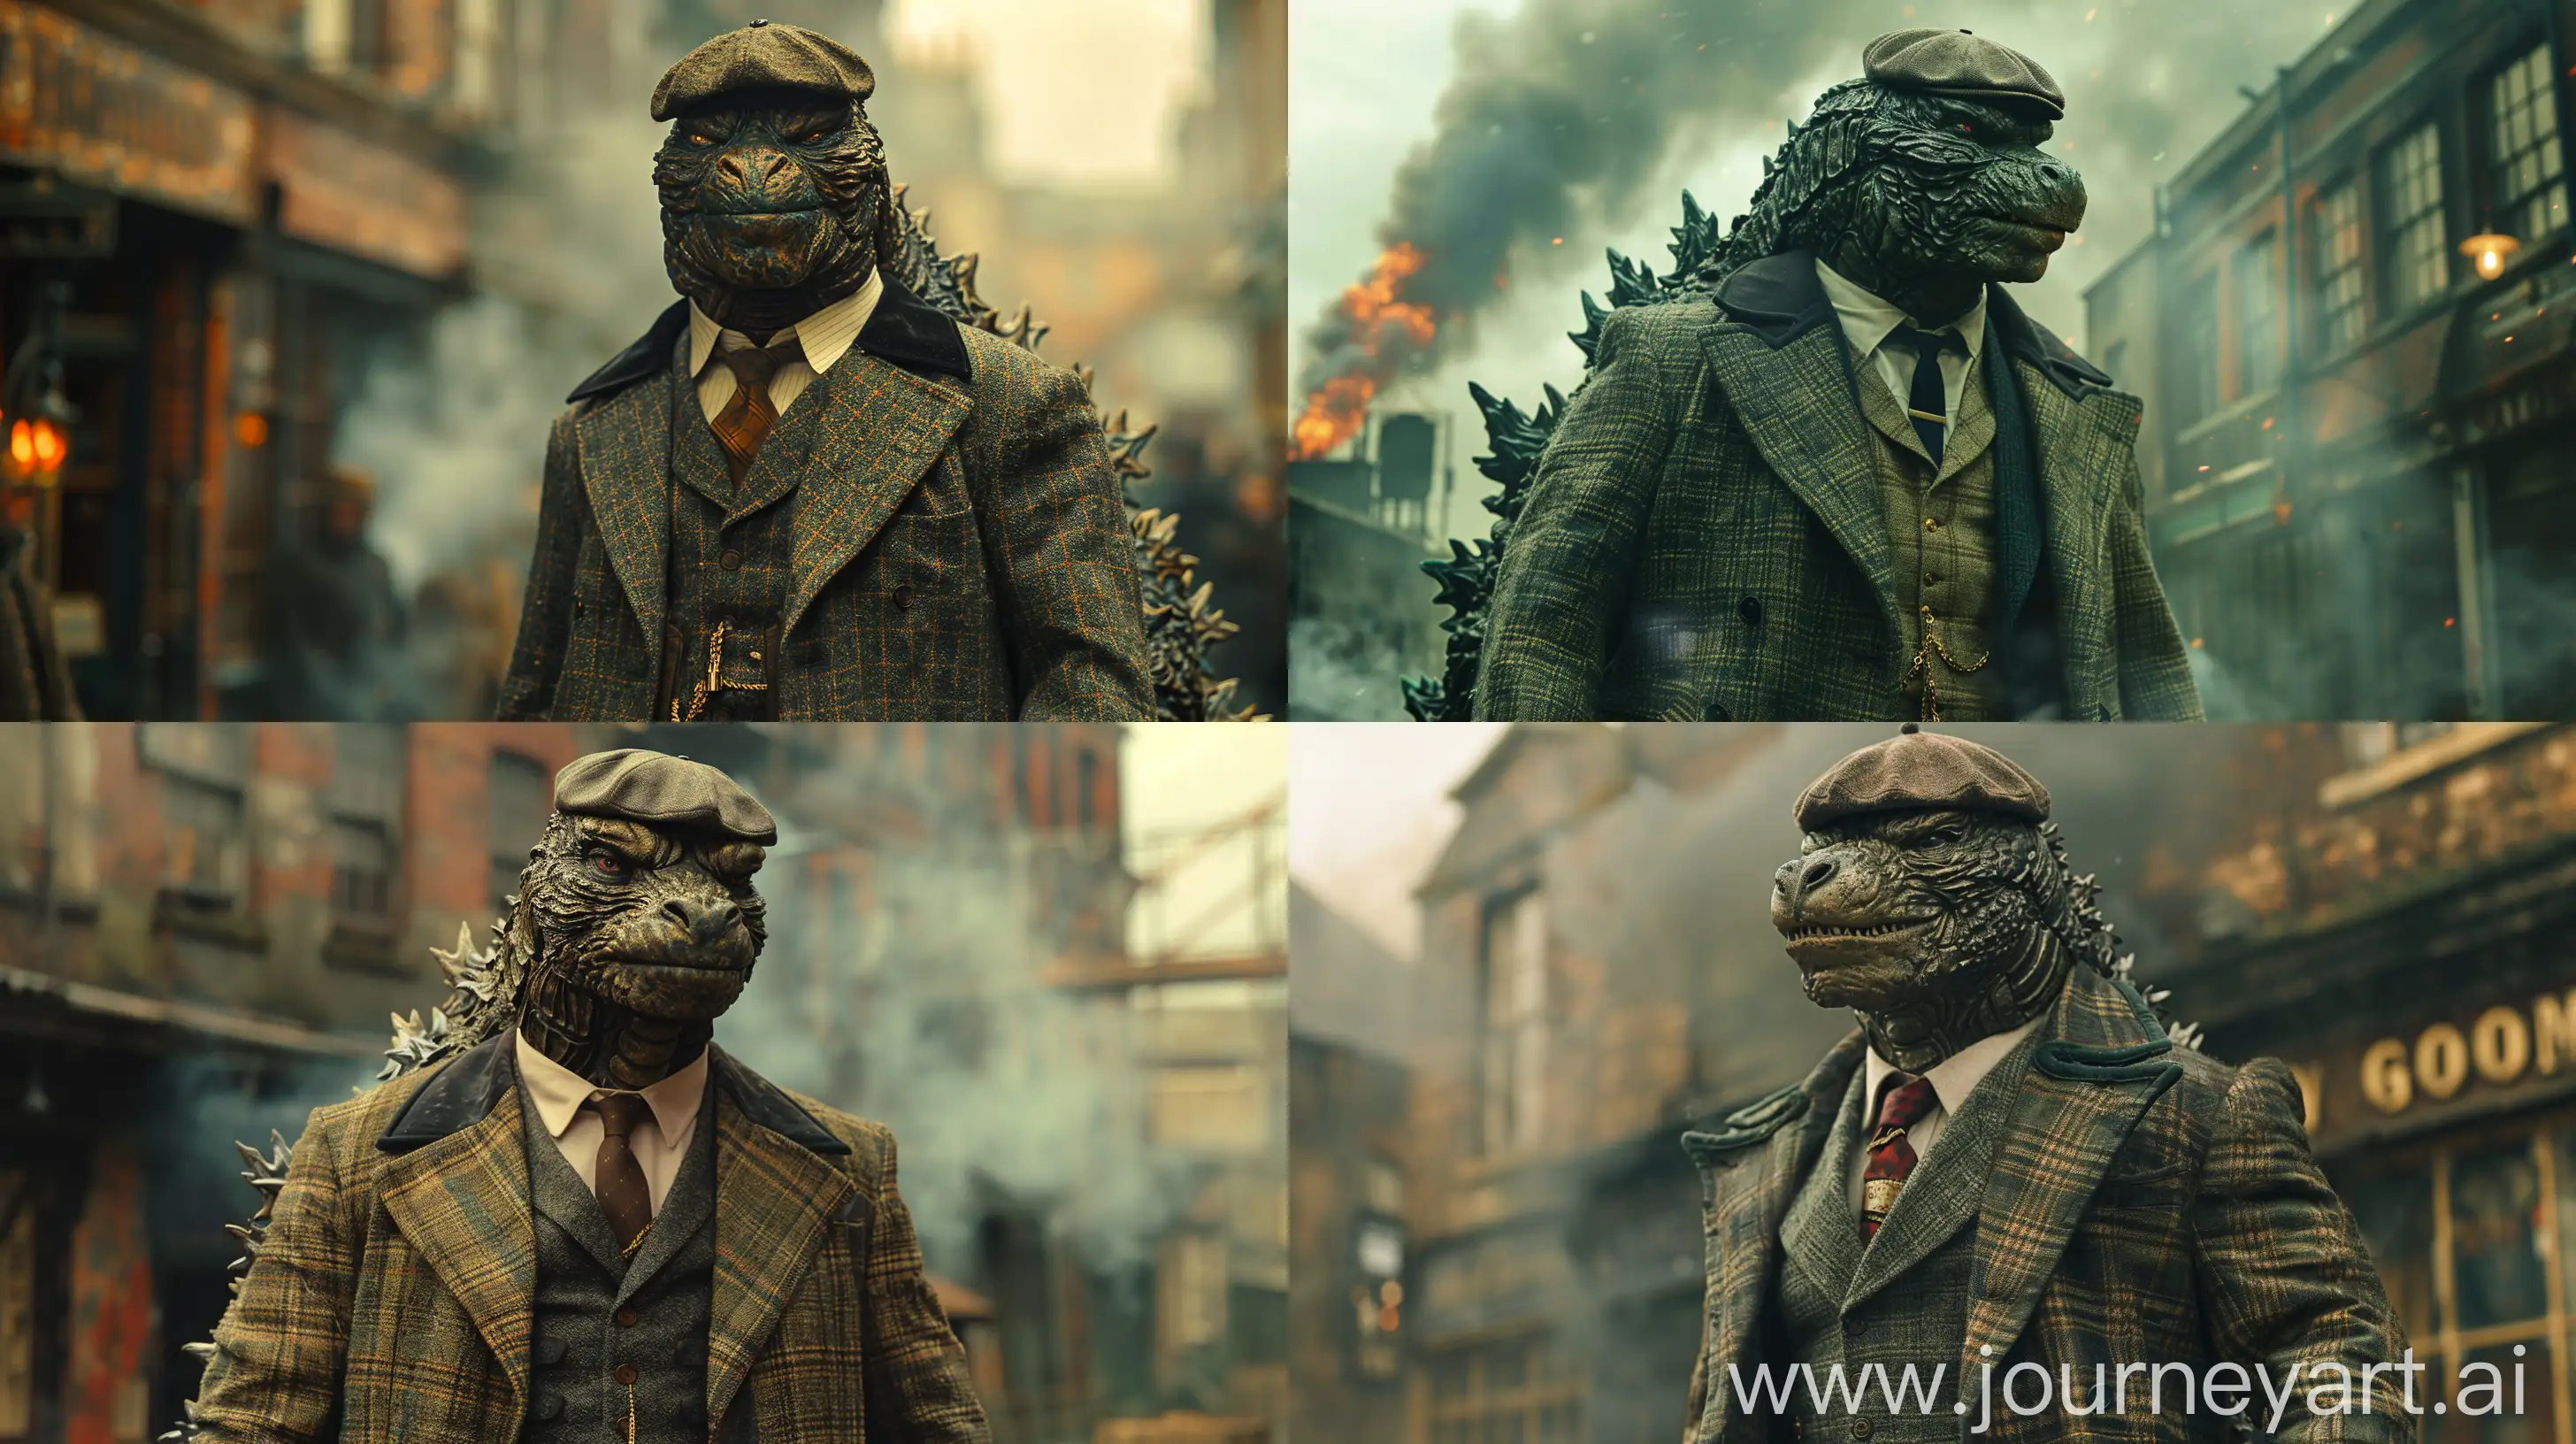   Godzilla dressed in a Wonder Woman costume, channeling the Peaky Blinders' style, a humorous yet serious demeanor, 1920s Birmingham setting, worn tweed suit textures, industrial smoke-filled backdrop, hulking figure poised confidently with a flat cap, juxtaposition of power and elegance, cinematic street scene --ar 16:9 --s 700 --v 6